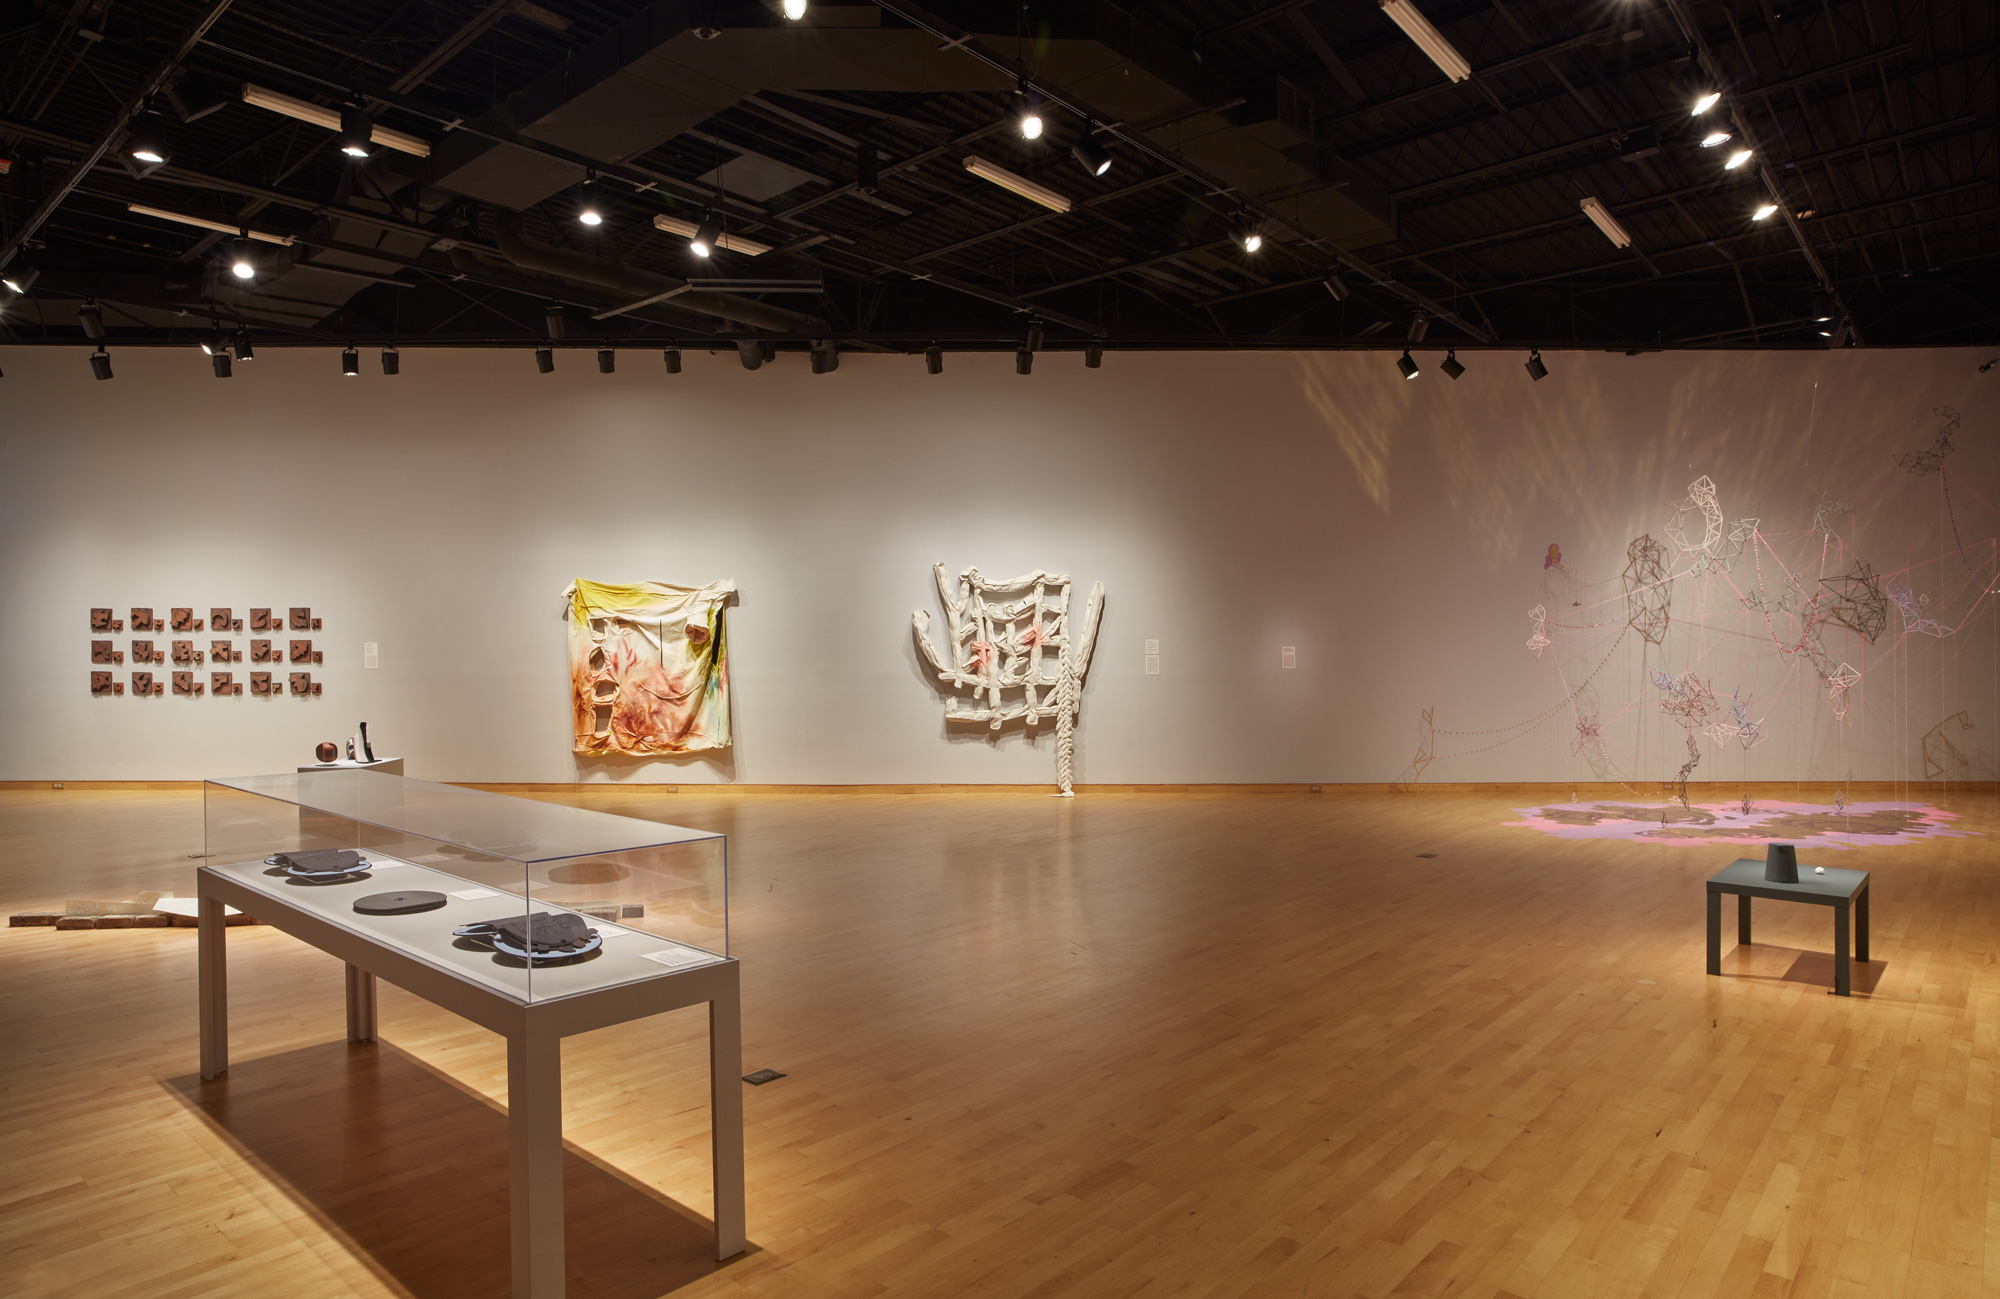 Installation view of Skyway 20/21 exhibition at USF Contemporary Art Museum. Left to right: works by Kodi Thompson, Rosemarie Chiarlone, Cynthia Mason, Casey McDonough, and Ry McCollough. Photo: Will Lytch.